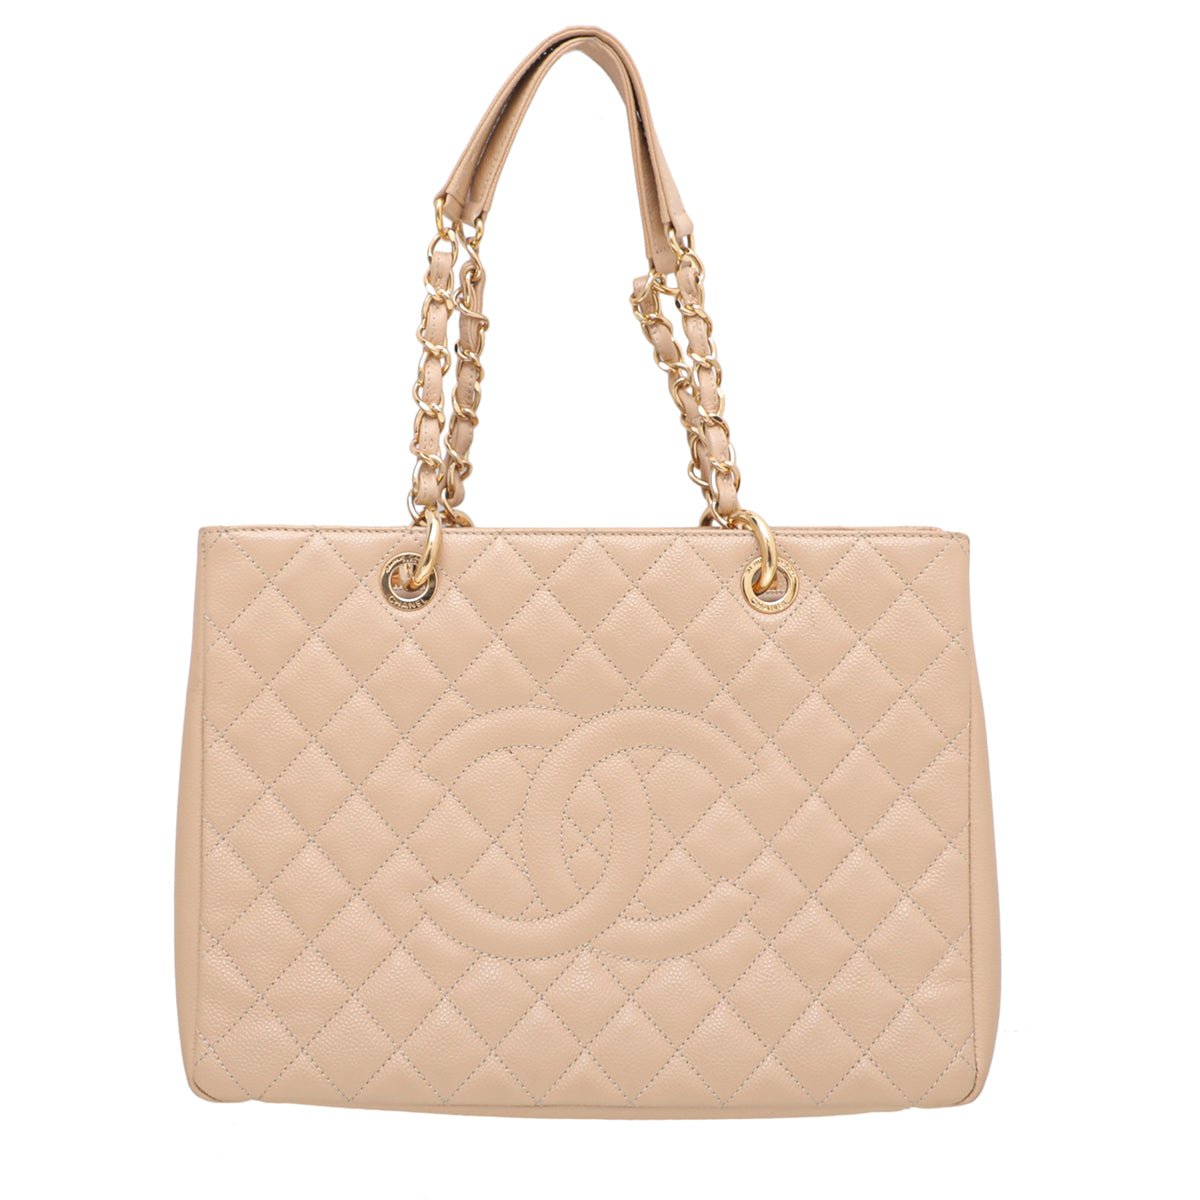 The Closet - Chanel Beige Grand Shopping Tote Bag | The Closet